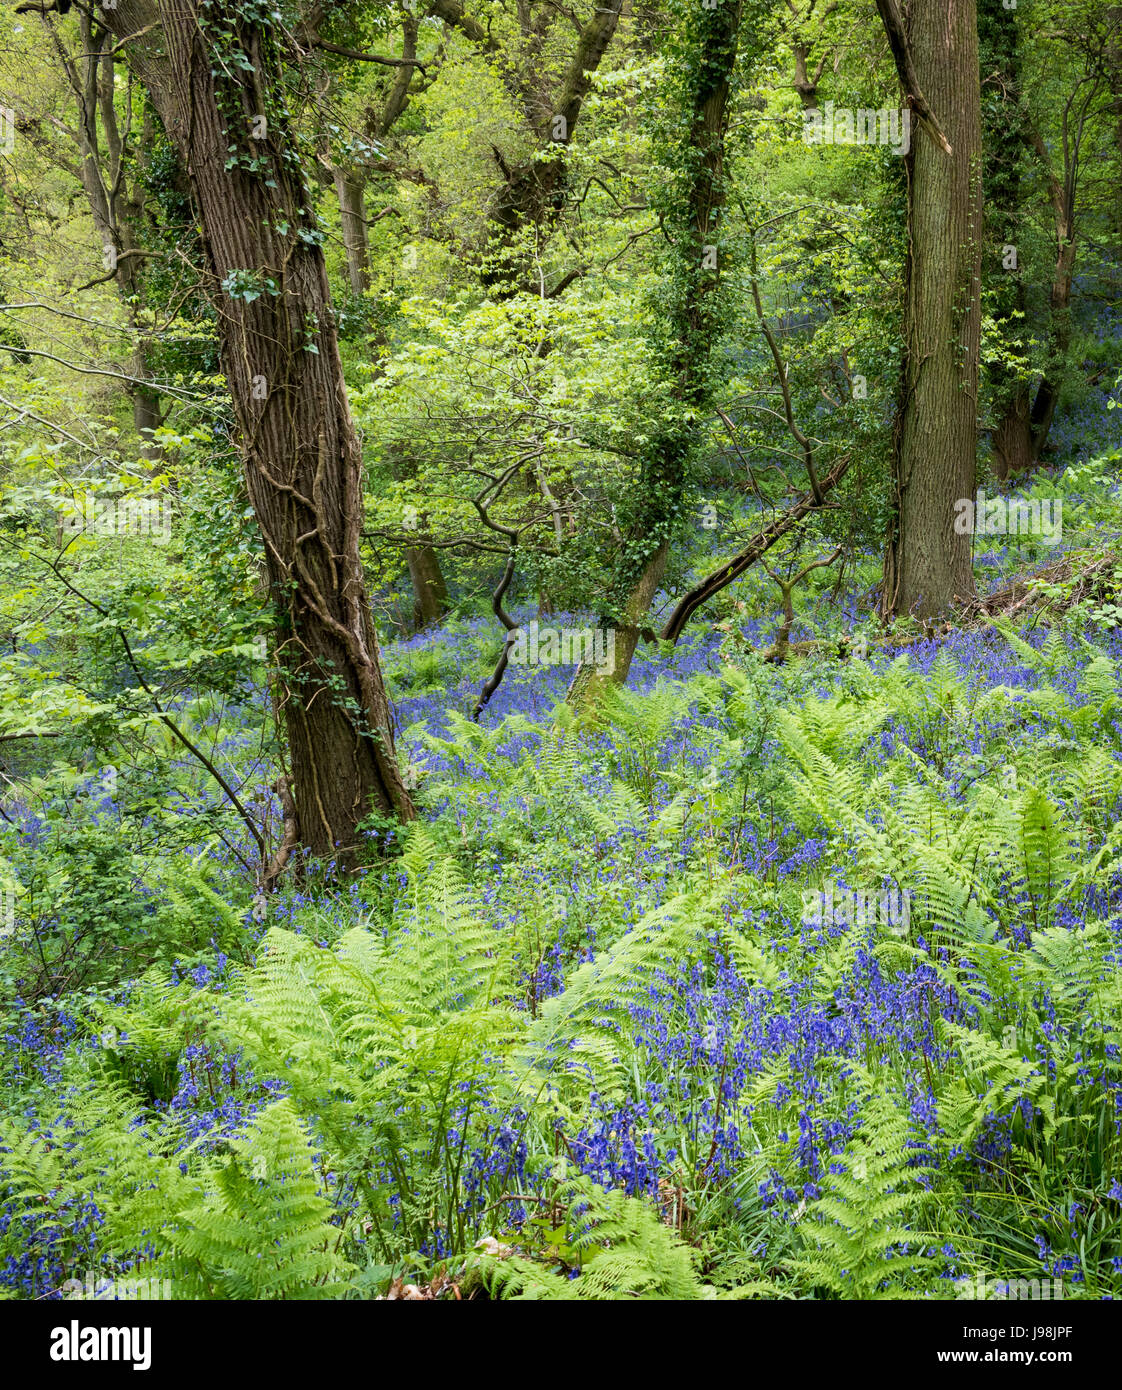 English Bluebells in a woodland setting. Stock Photo